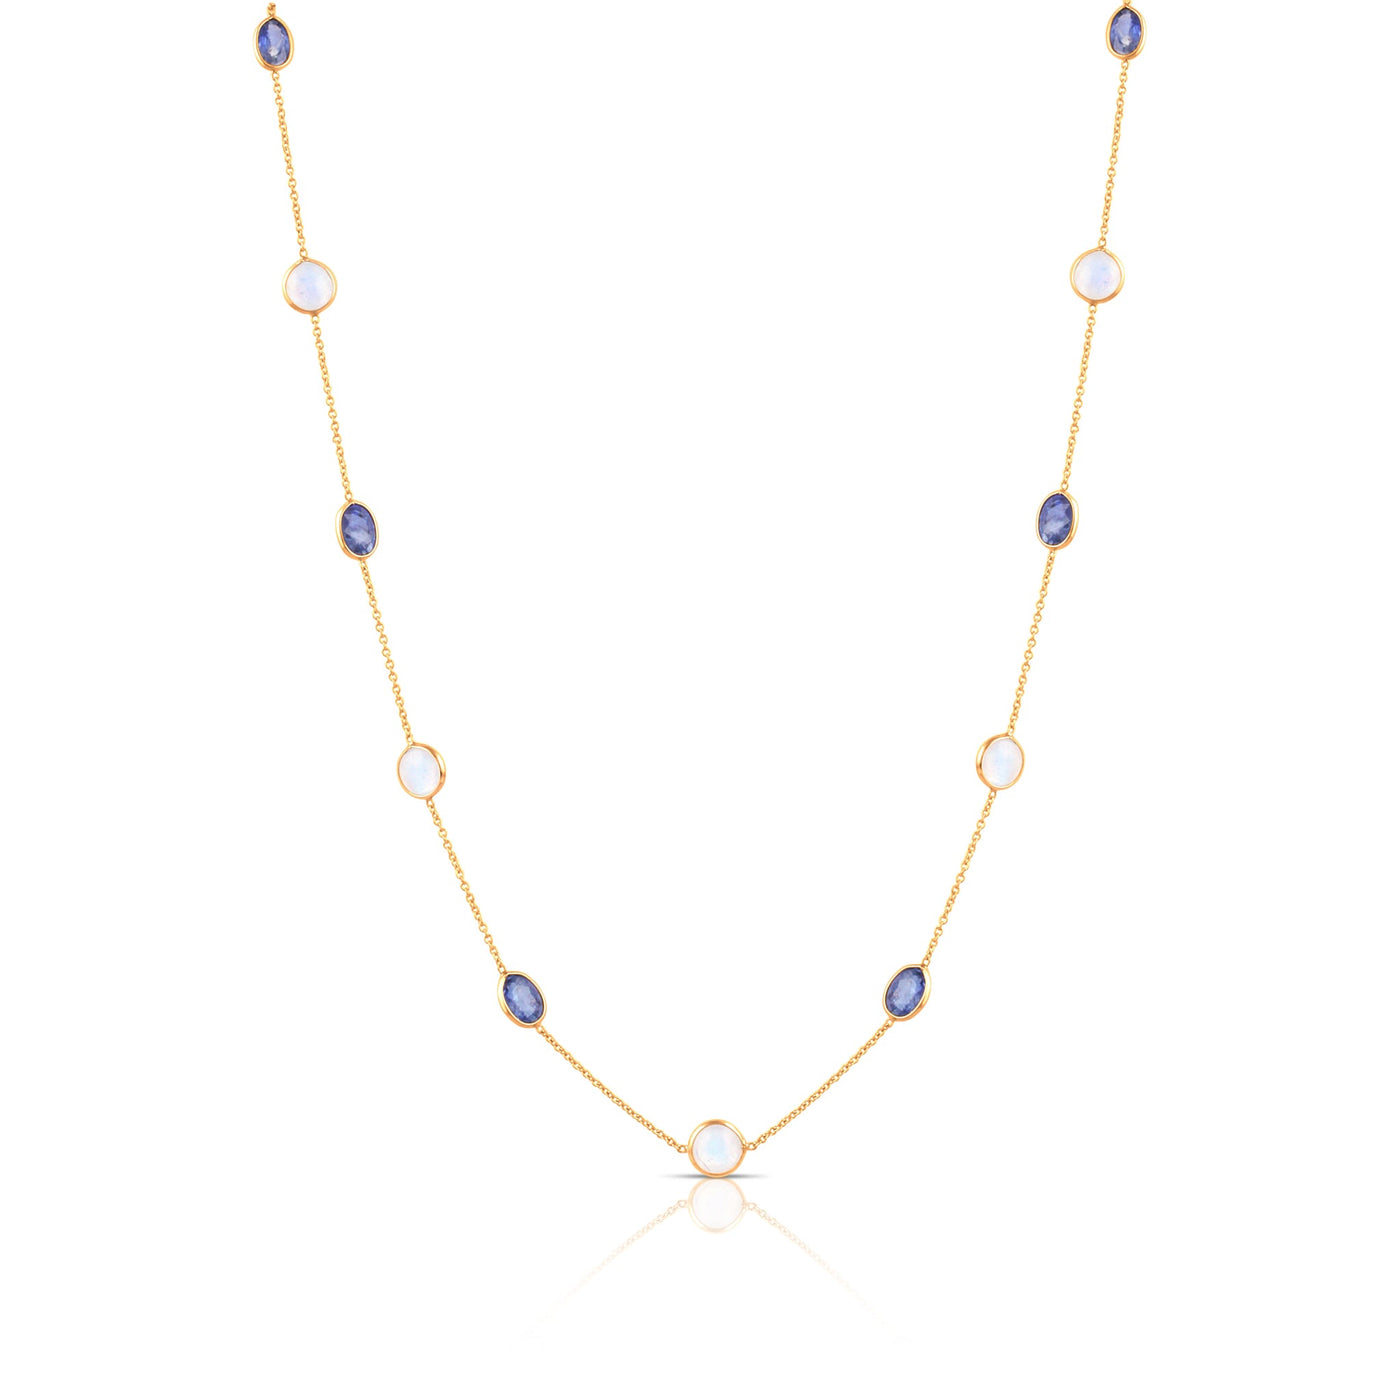 Rainbow Moonstone Round And Blue Sapphire Oval Necklace In 18K Yellow Gold, Blue Sapphire Chain, Rainbow Moonstone Chain, Gold Chain